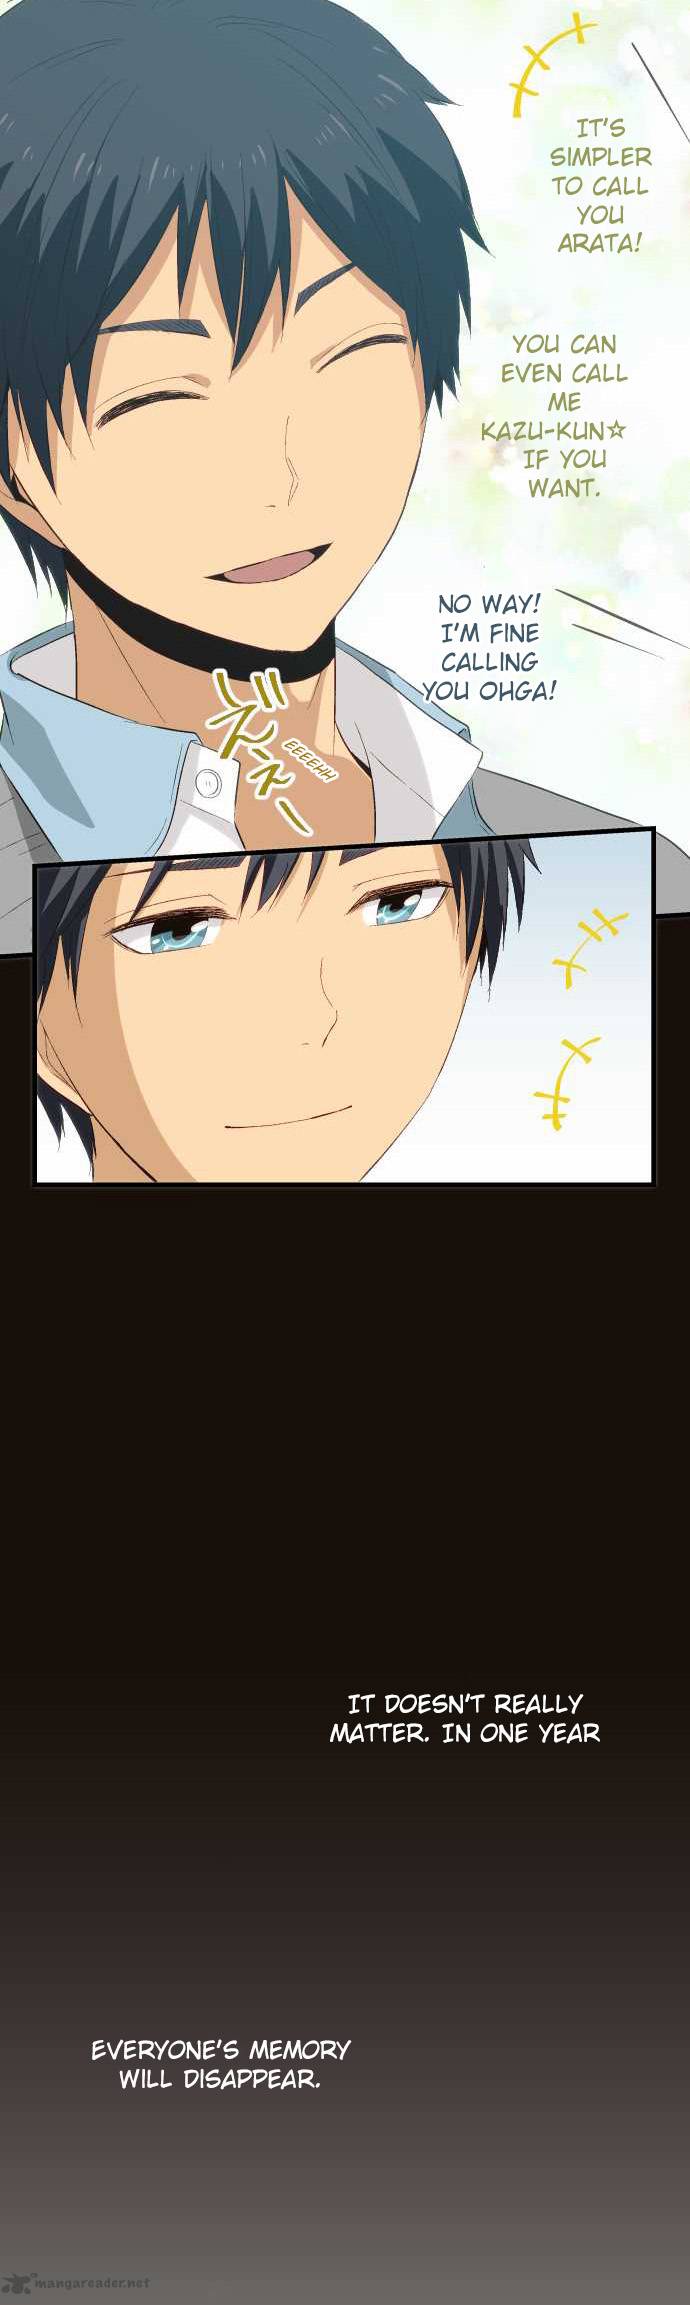 Relife 20 14